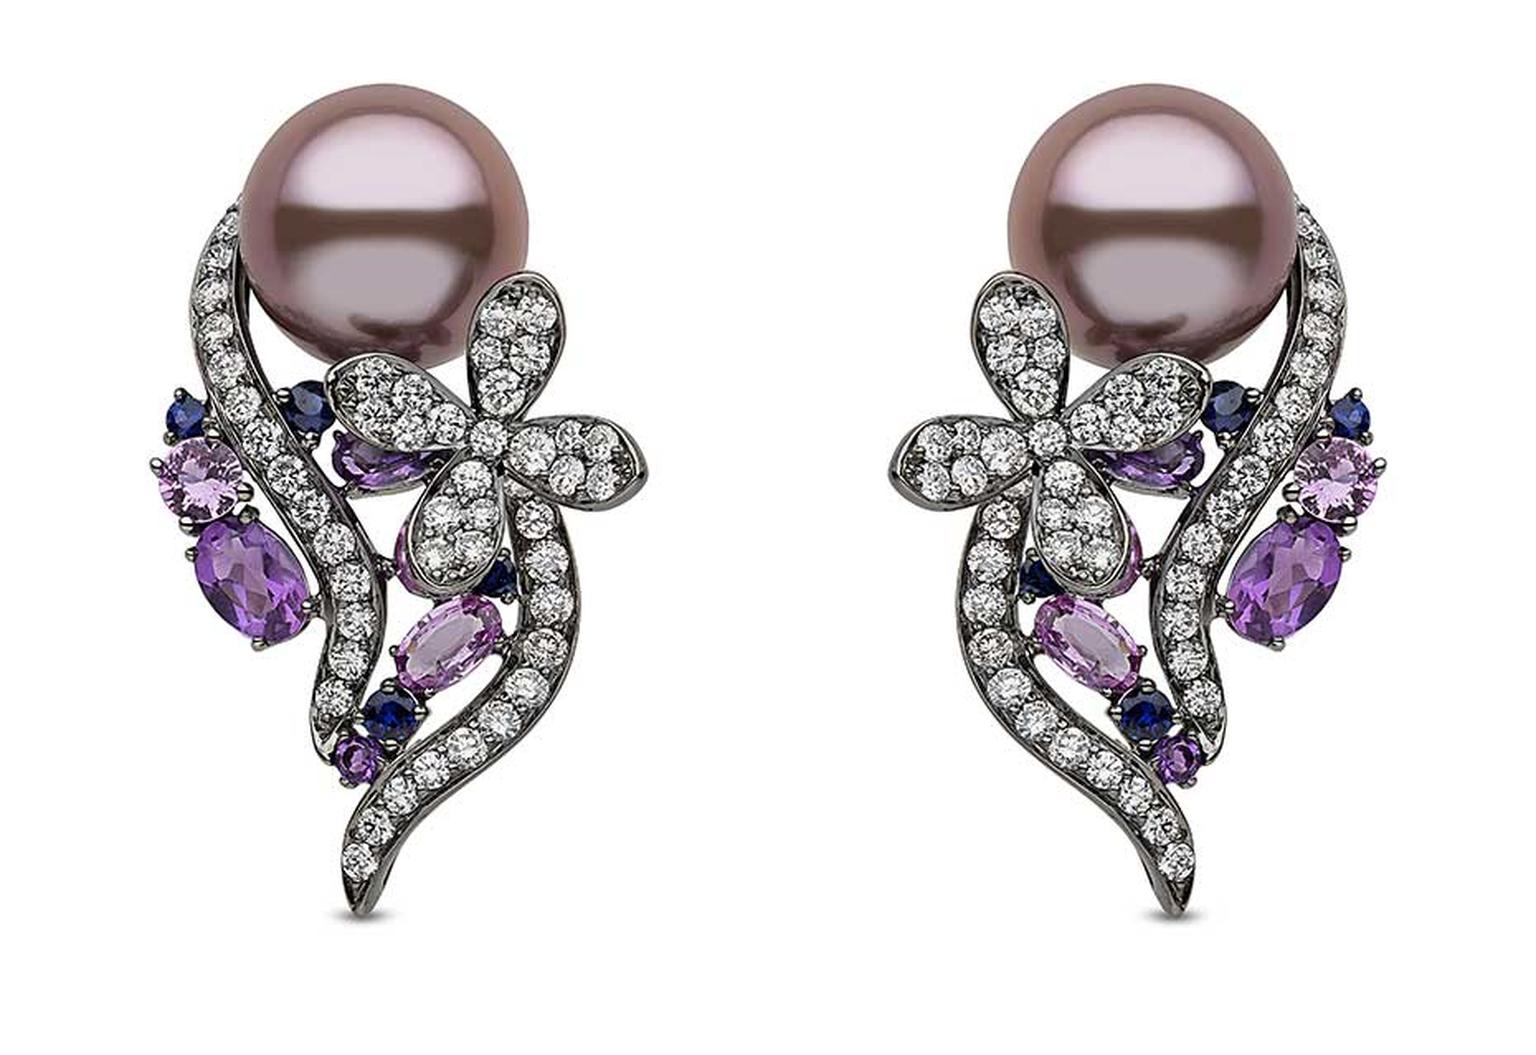 Yoko London pearl earrings in black gold with 12-13mm natural colour pink freshwater pearls, diamonds and multi-coloured sapphires.